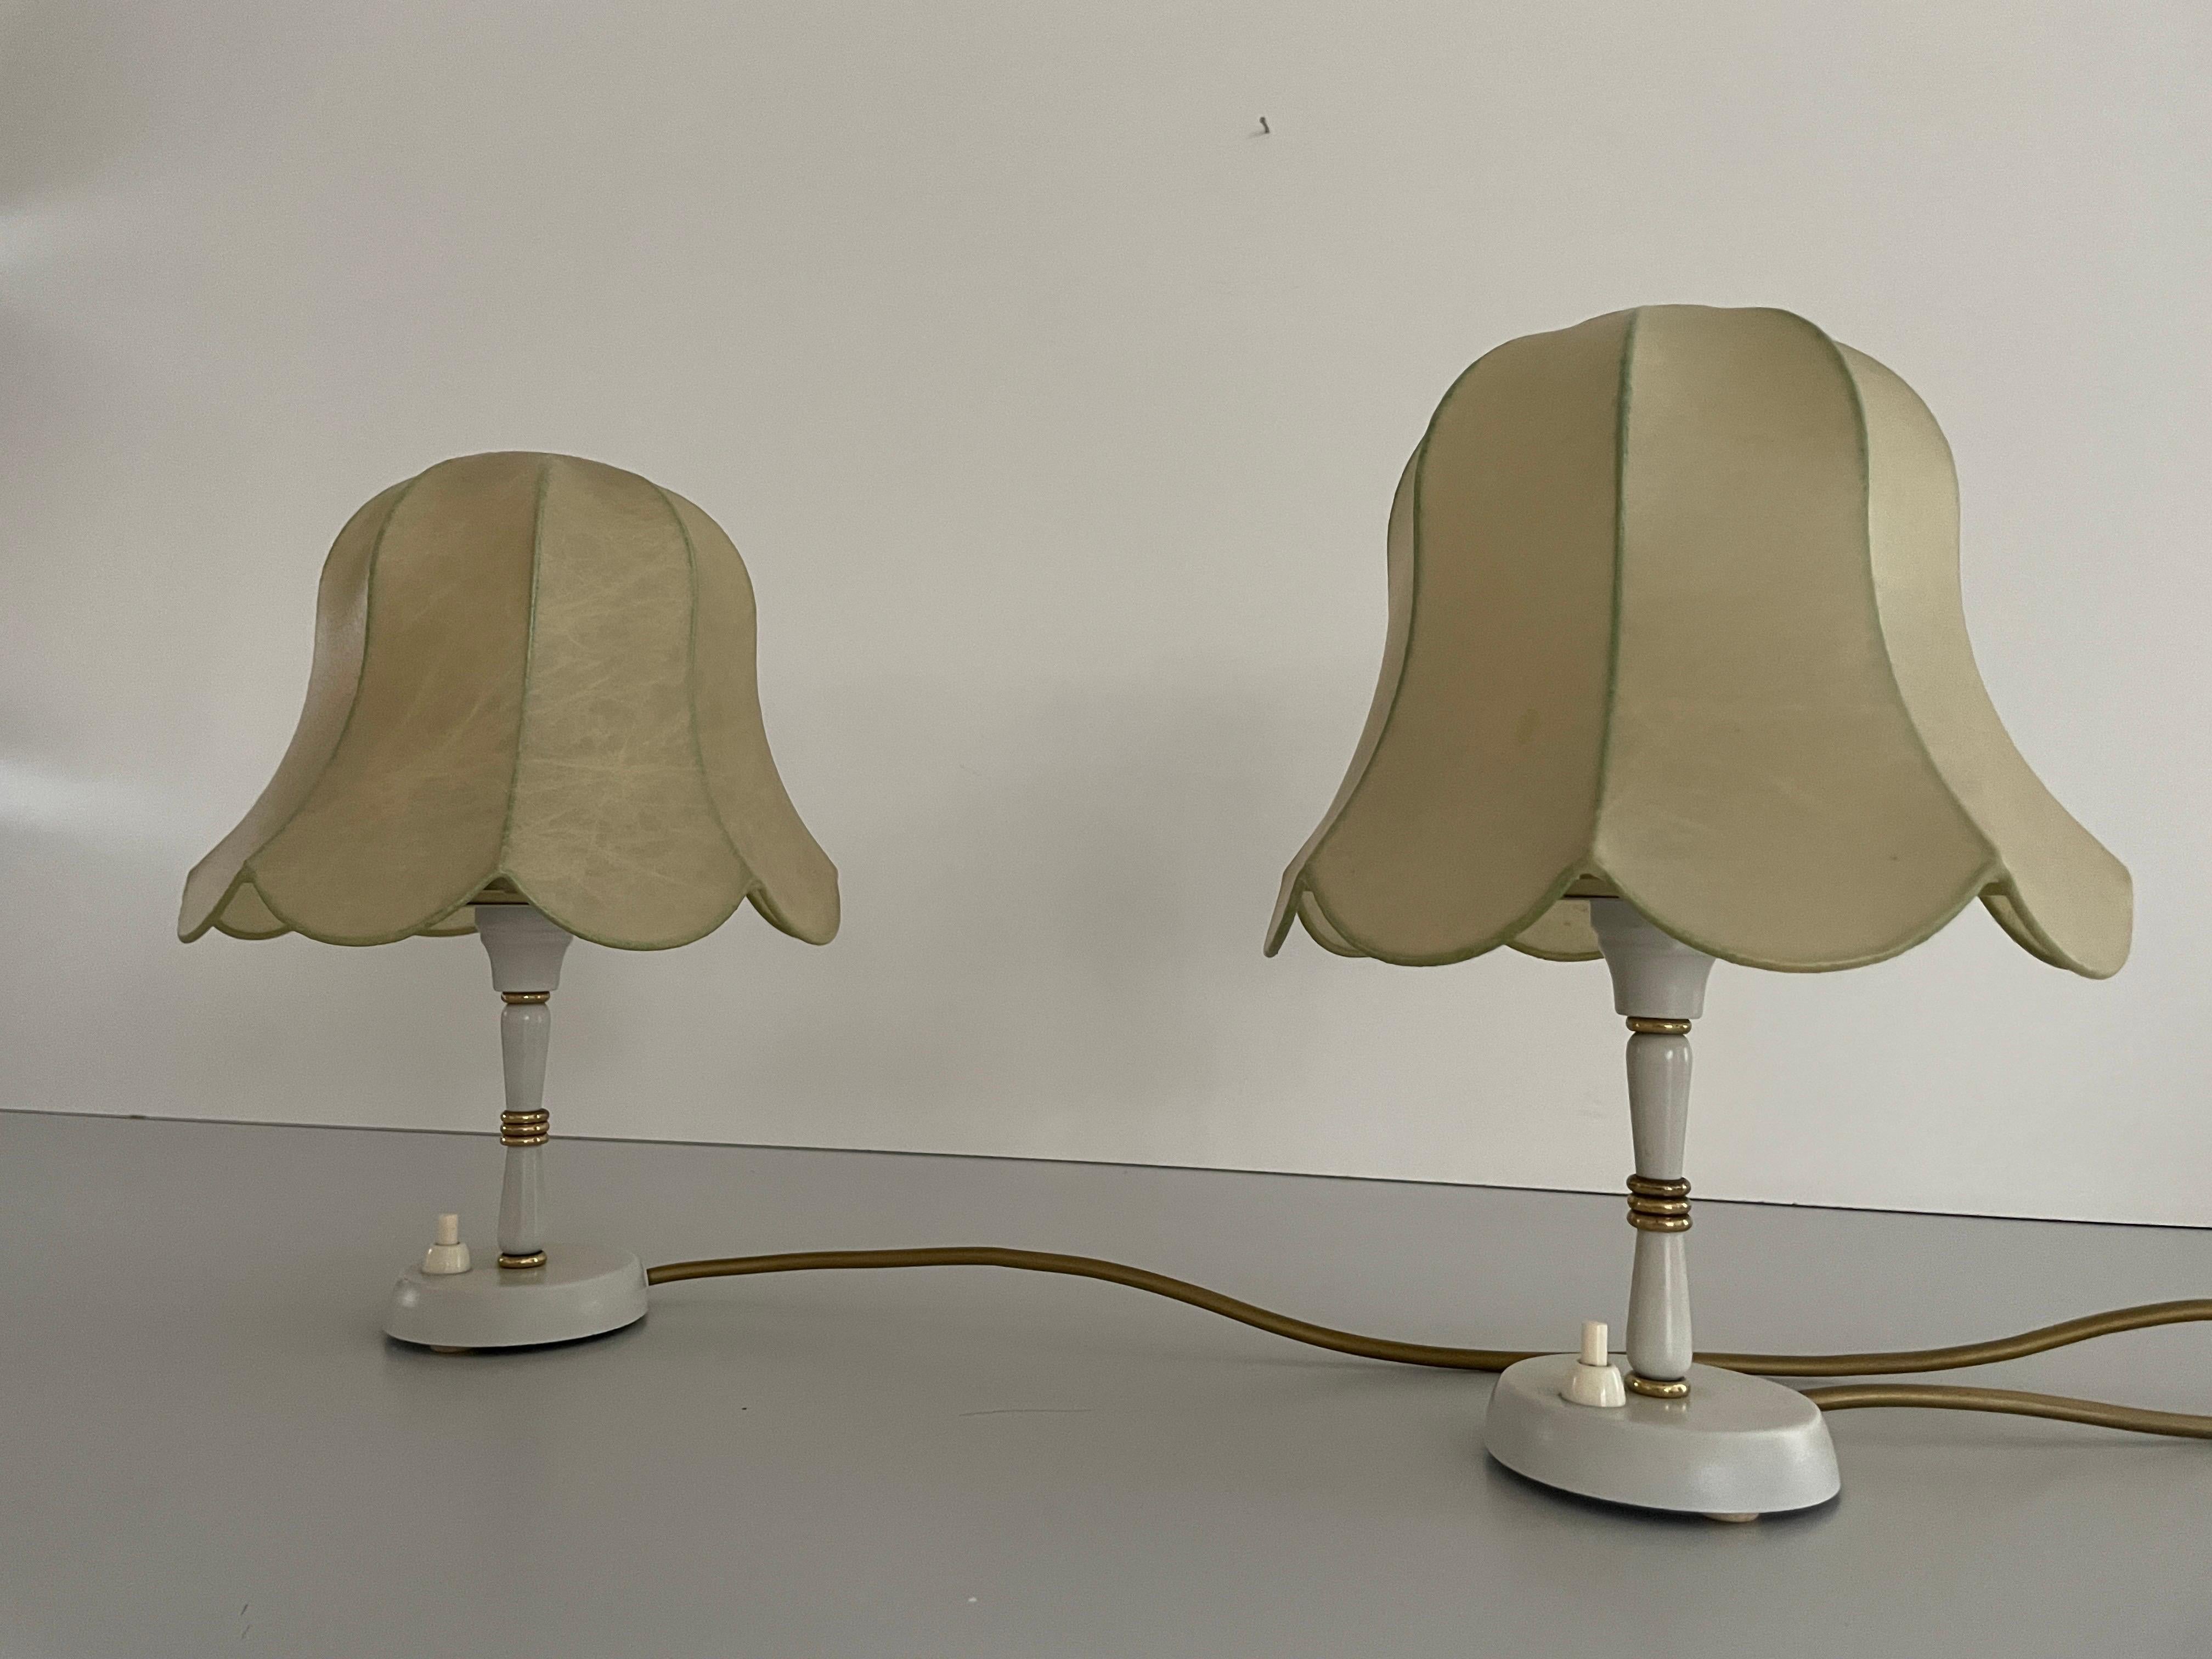 Cocoon Shade Metal Body Pair of Bedside Lamps by GOLDKANT, 1970s, Germany
 
Cocoon shades & metal body

Minimal and natural design
Very high quality.
Fully functional.
Original cable and plug. These lamps are suitable for EU plug socket. Other types